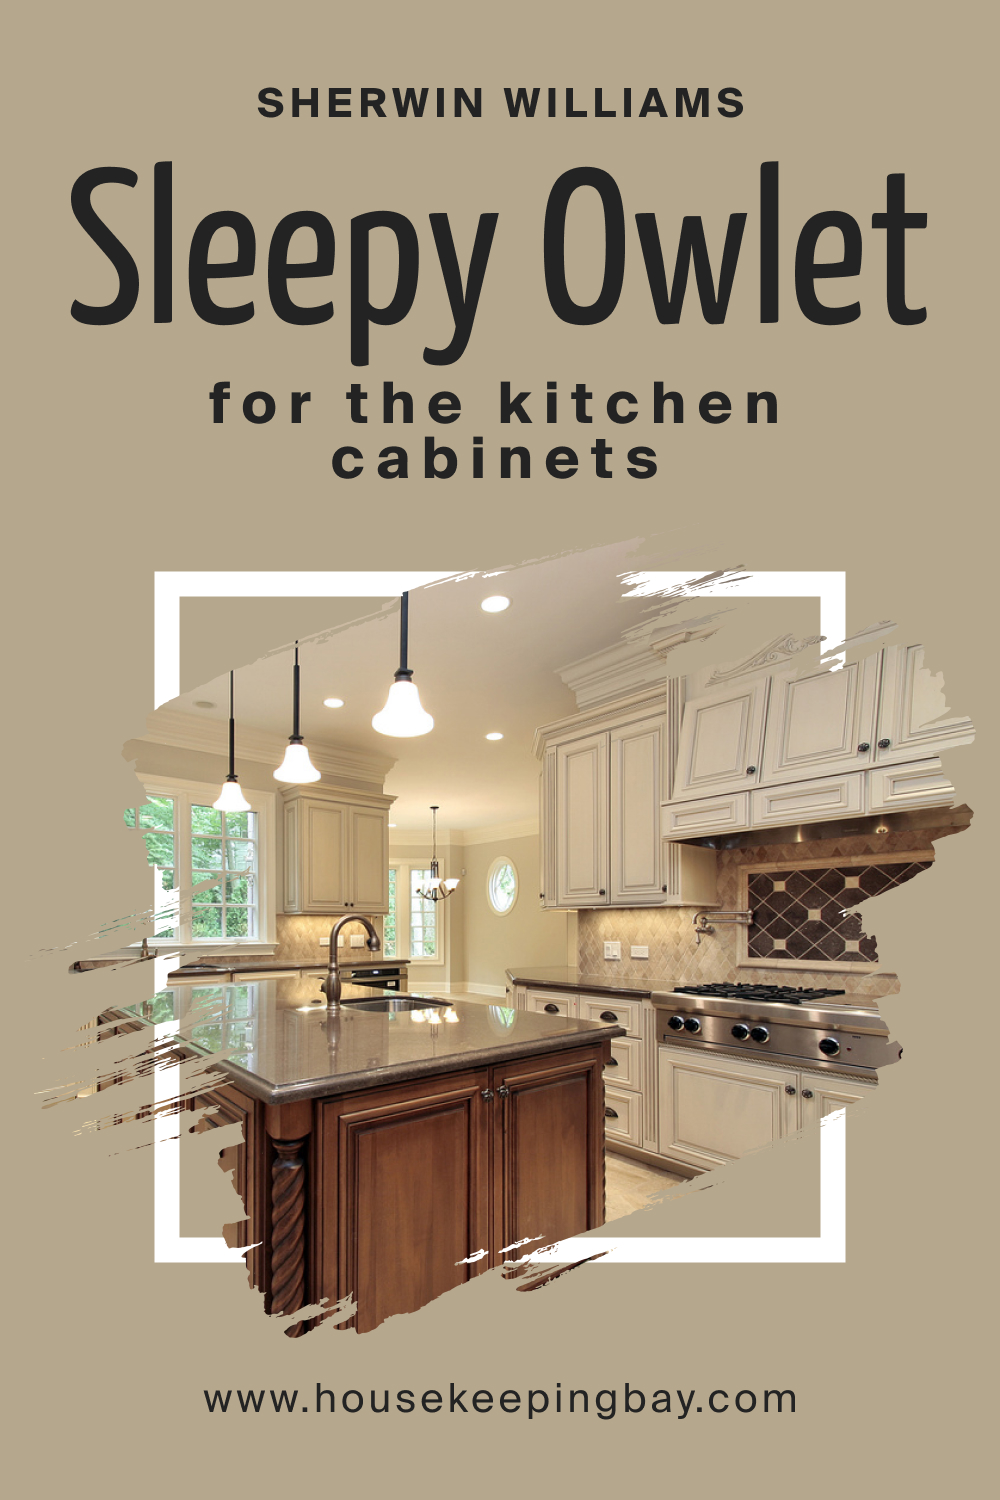 Sherwin Williams. SW 9513 Sleepy Owlet For the Kitchen Cabinets